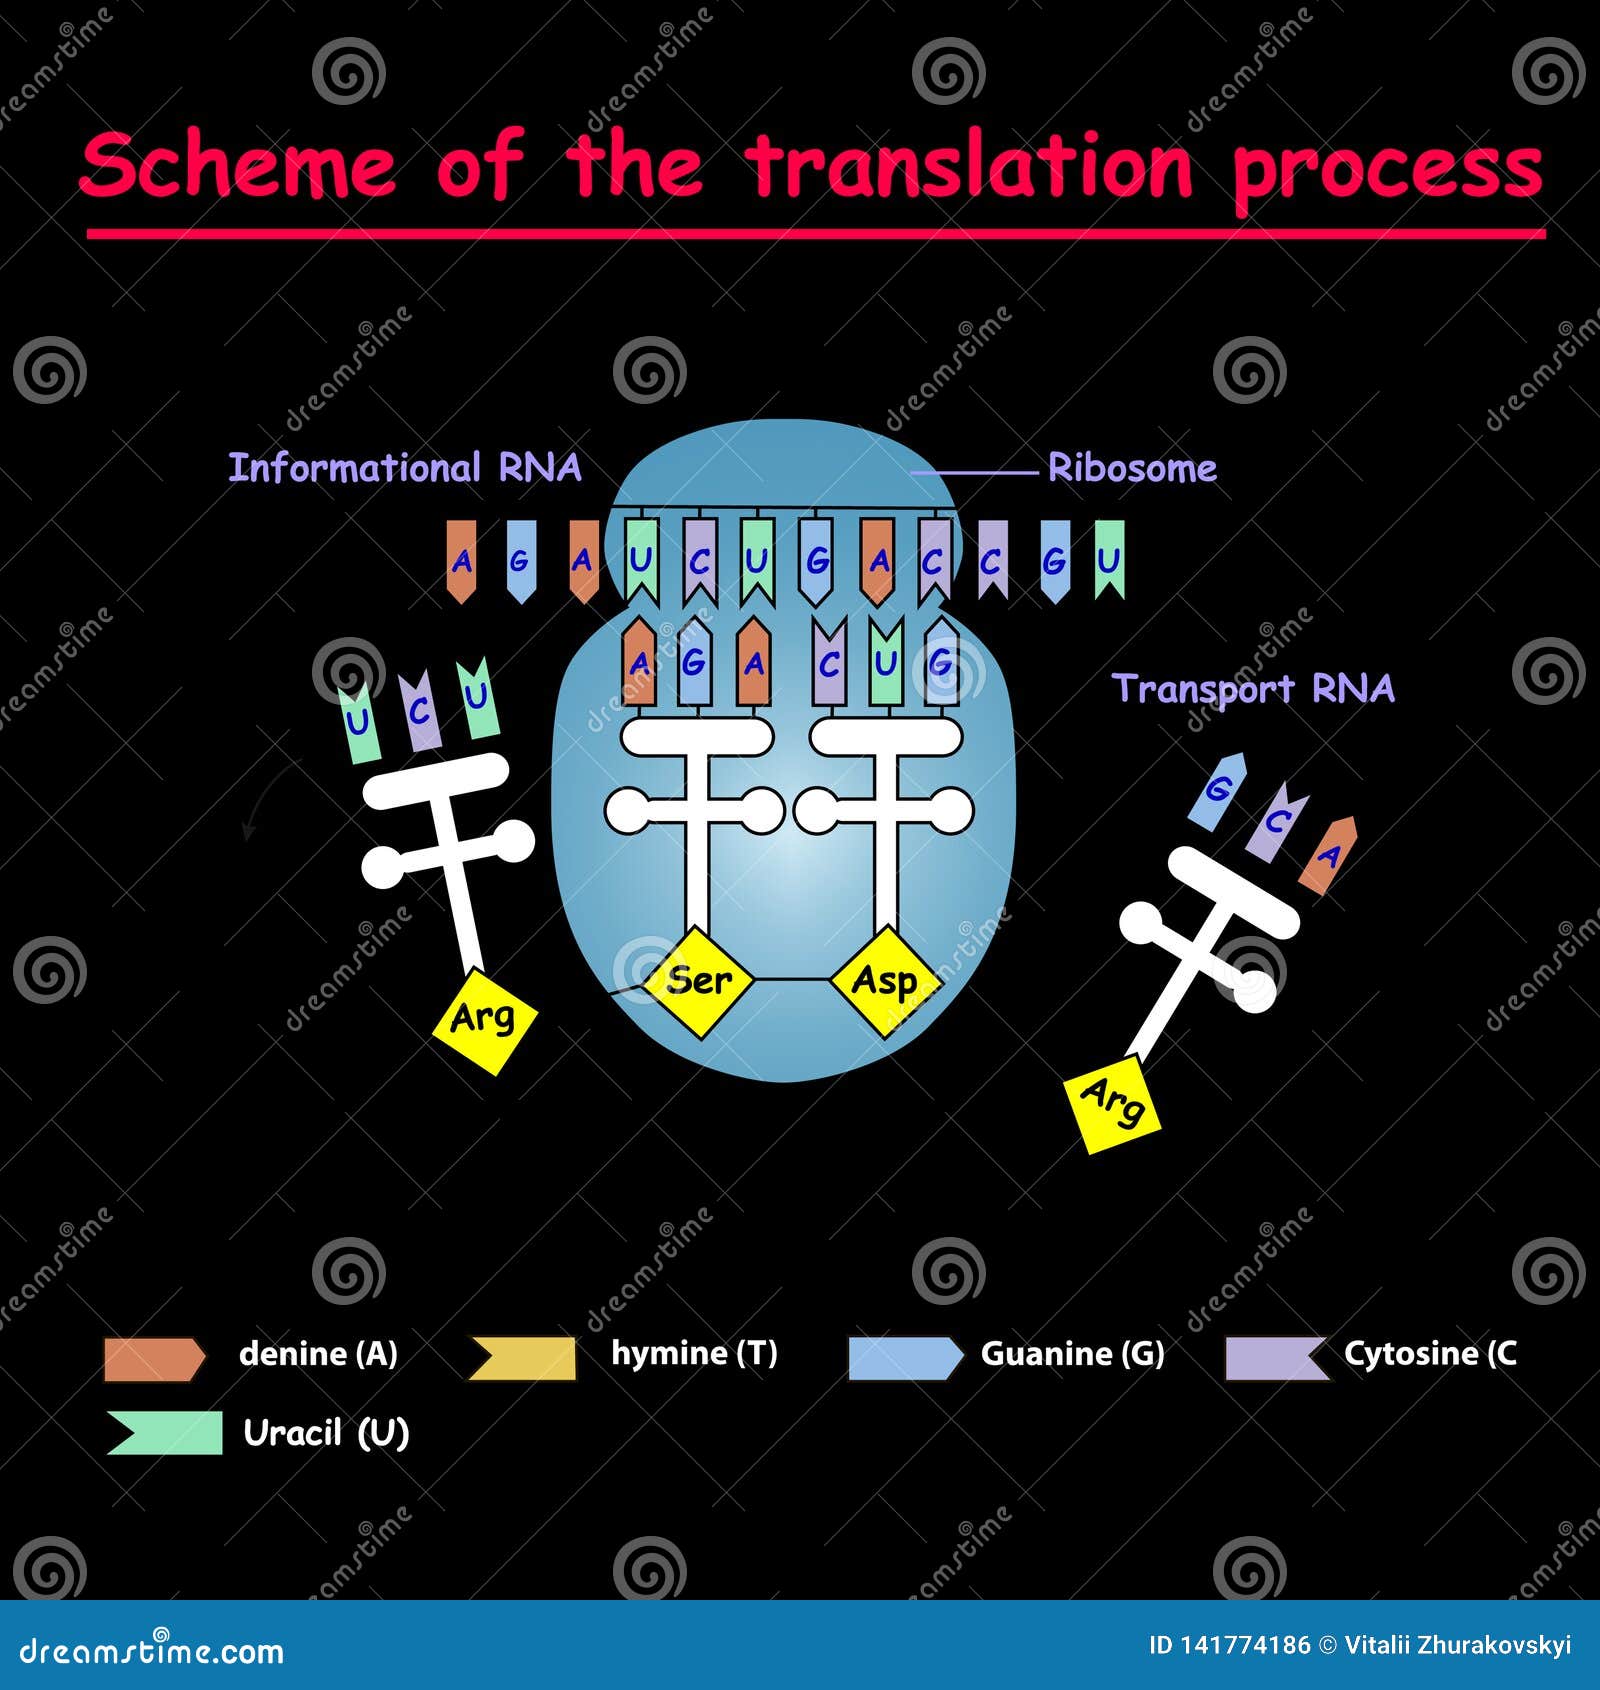 scheme of the translation process. syntesis of mrna from dna in the nucleus. the mrna decoding ribosome by binding of complementar